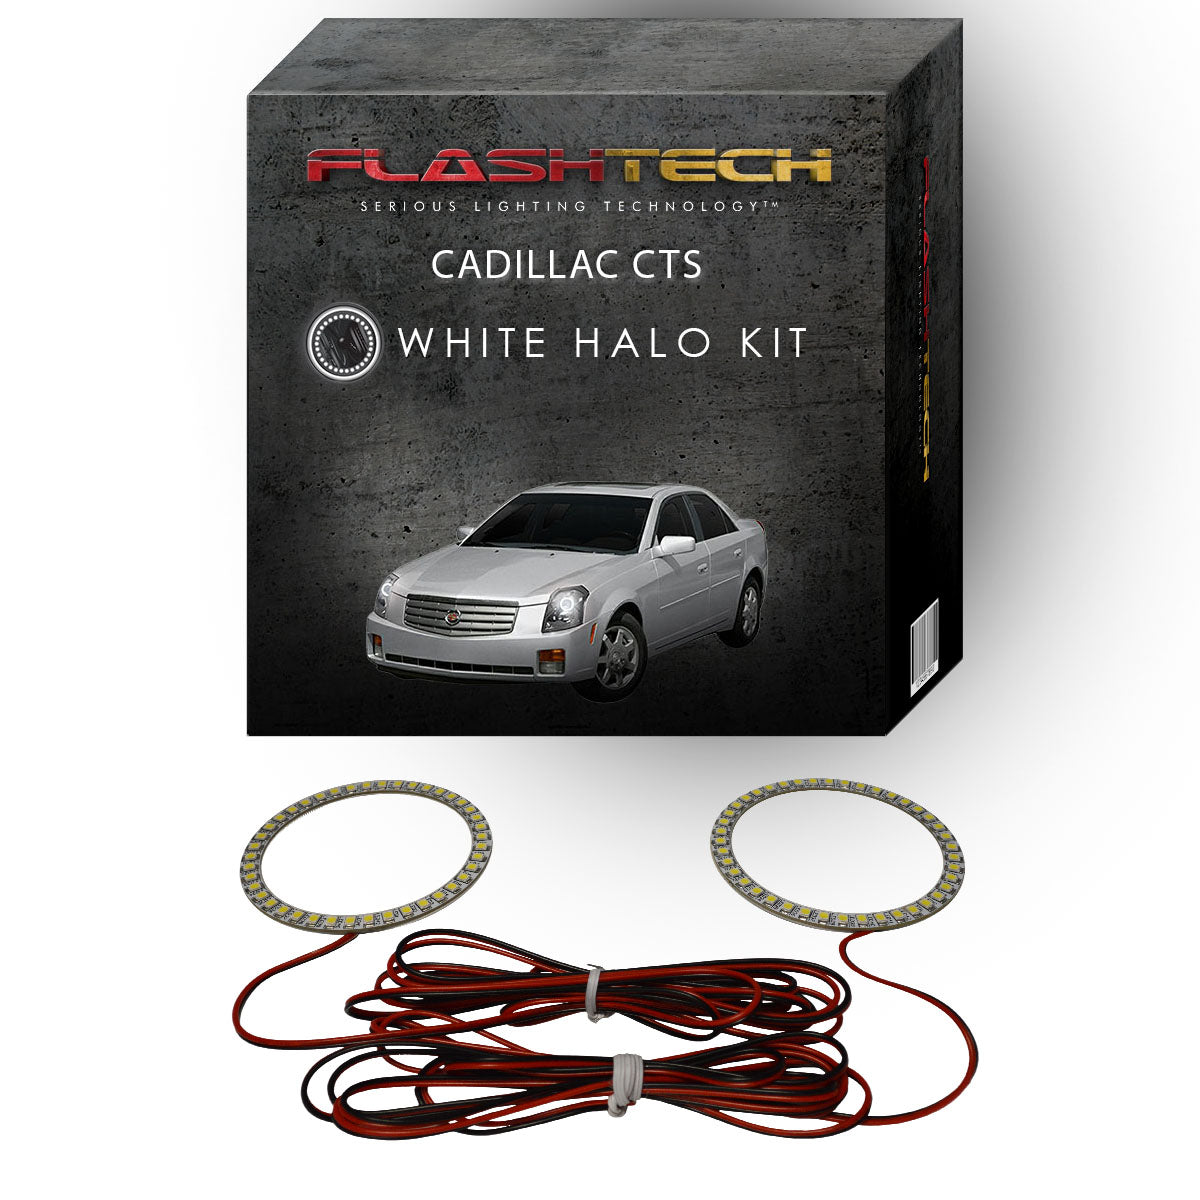 Cadillac-CTS-2003, 2004, 2005, 2006, 2007-LED-Halo-Headlights-White-RF Remote White-CA-CTS0307-WHRF